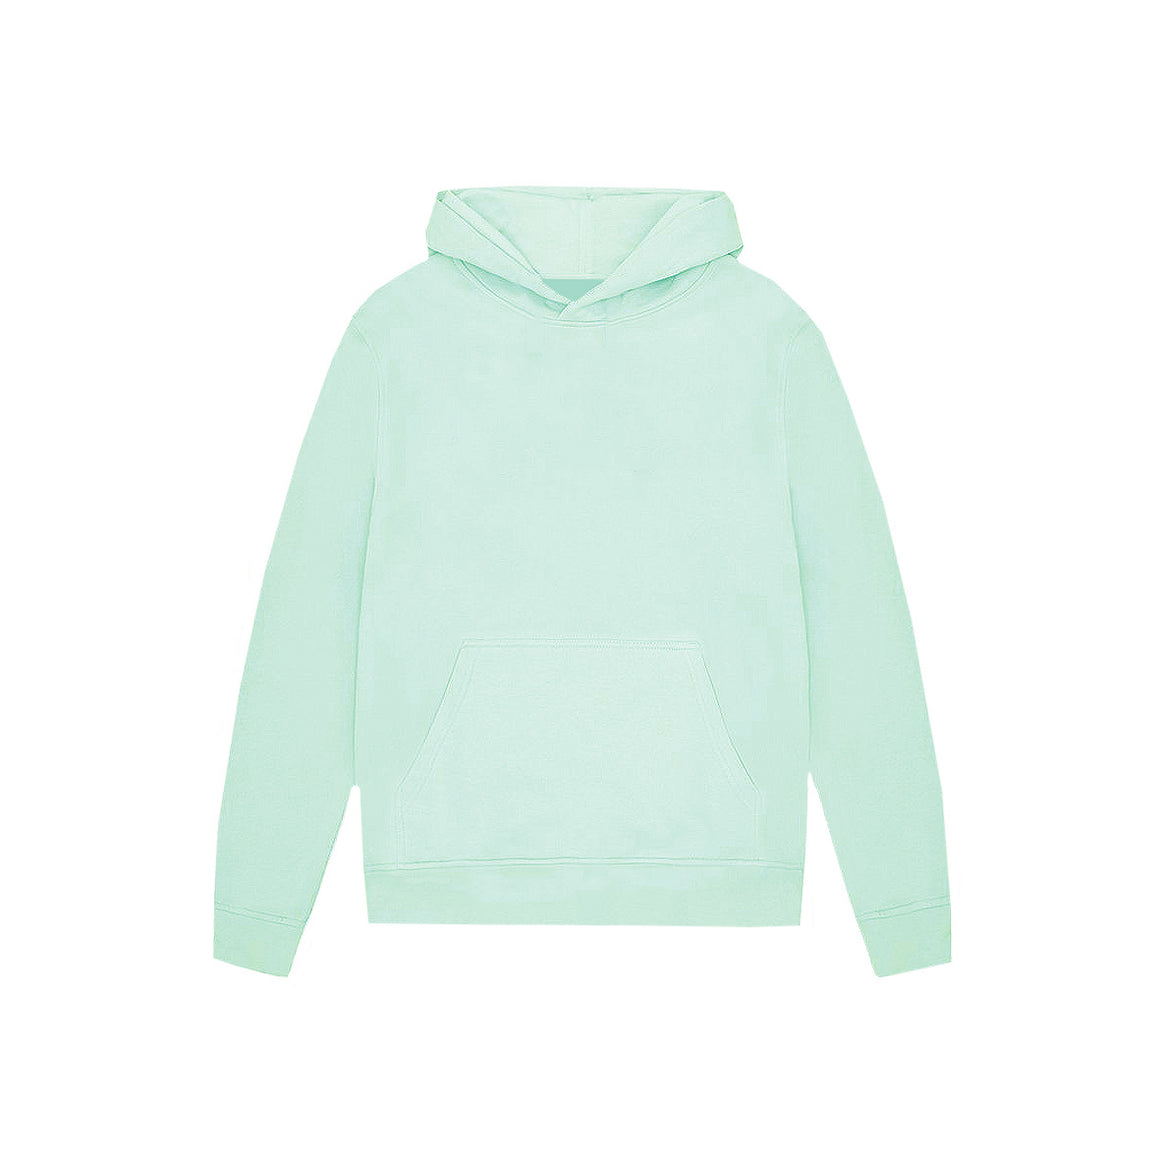 54 FLORAL PREMIUM PULLOVER HOODY - MINT